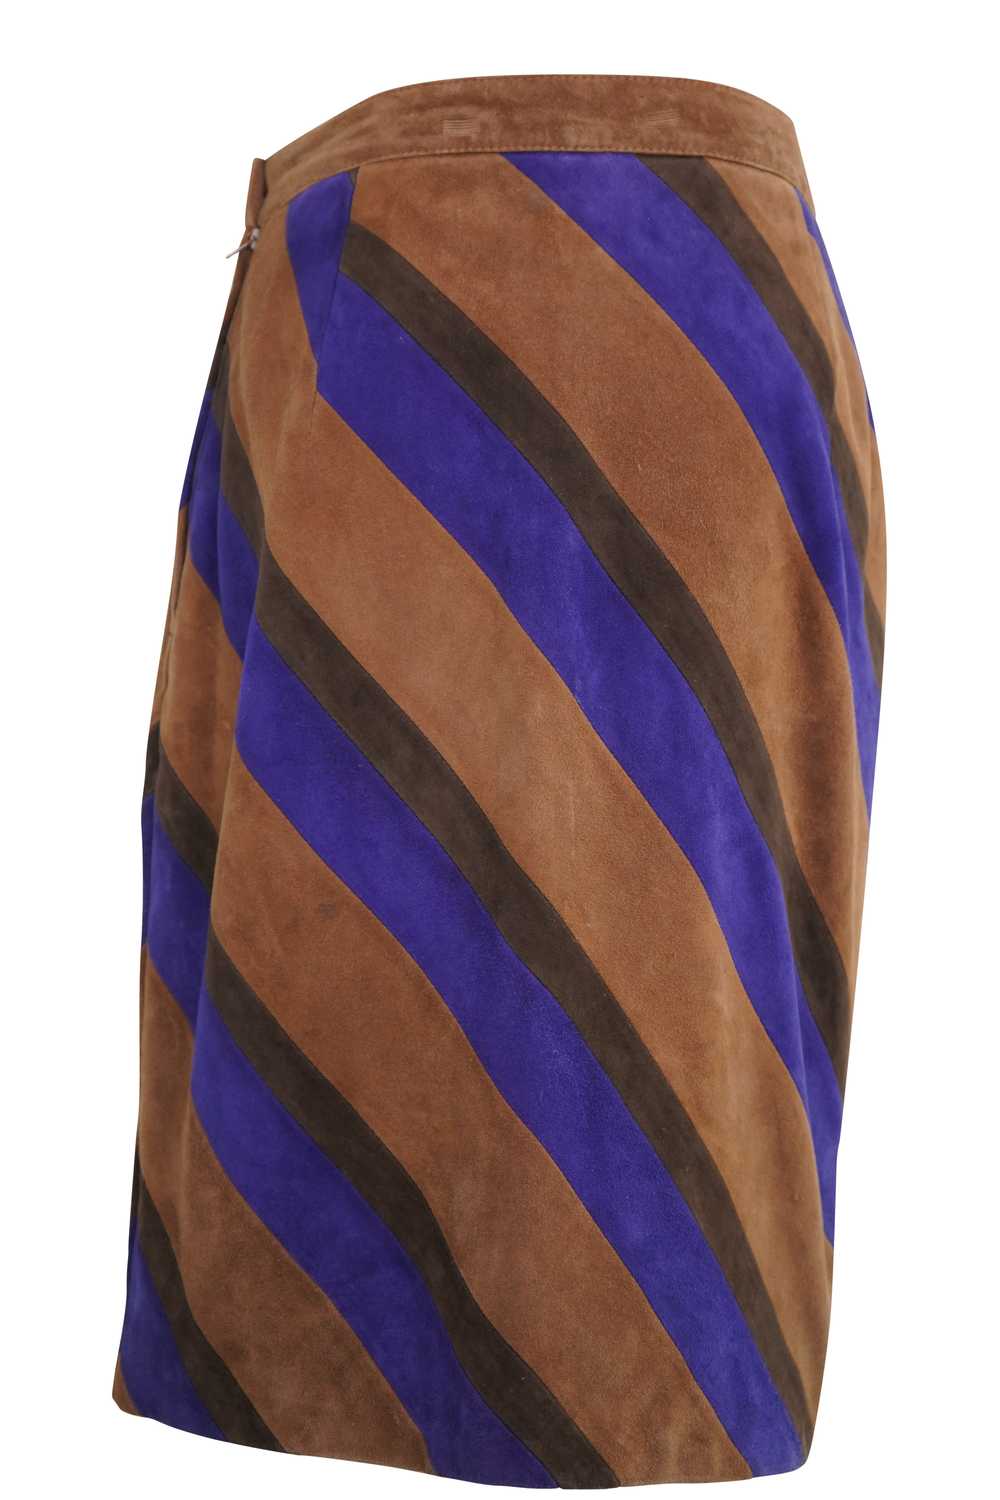 1980's Brown And Purple Suede Valentino Skirt - image 3